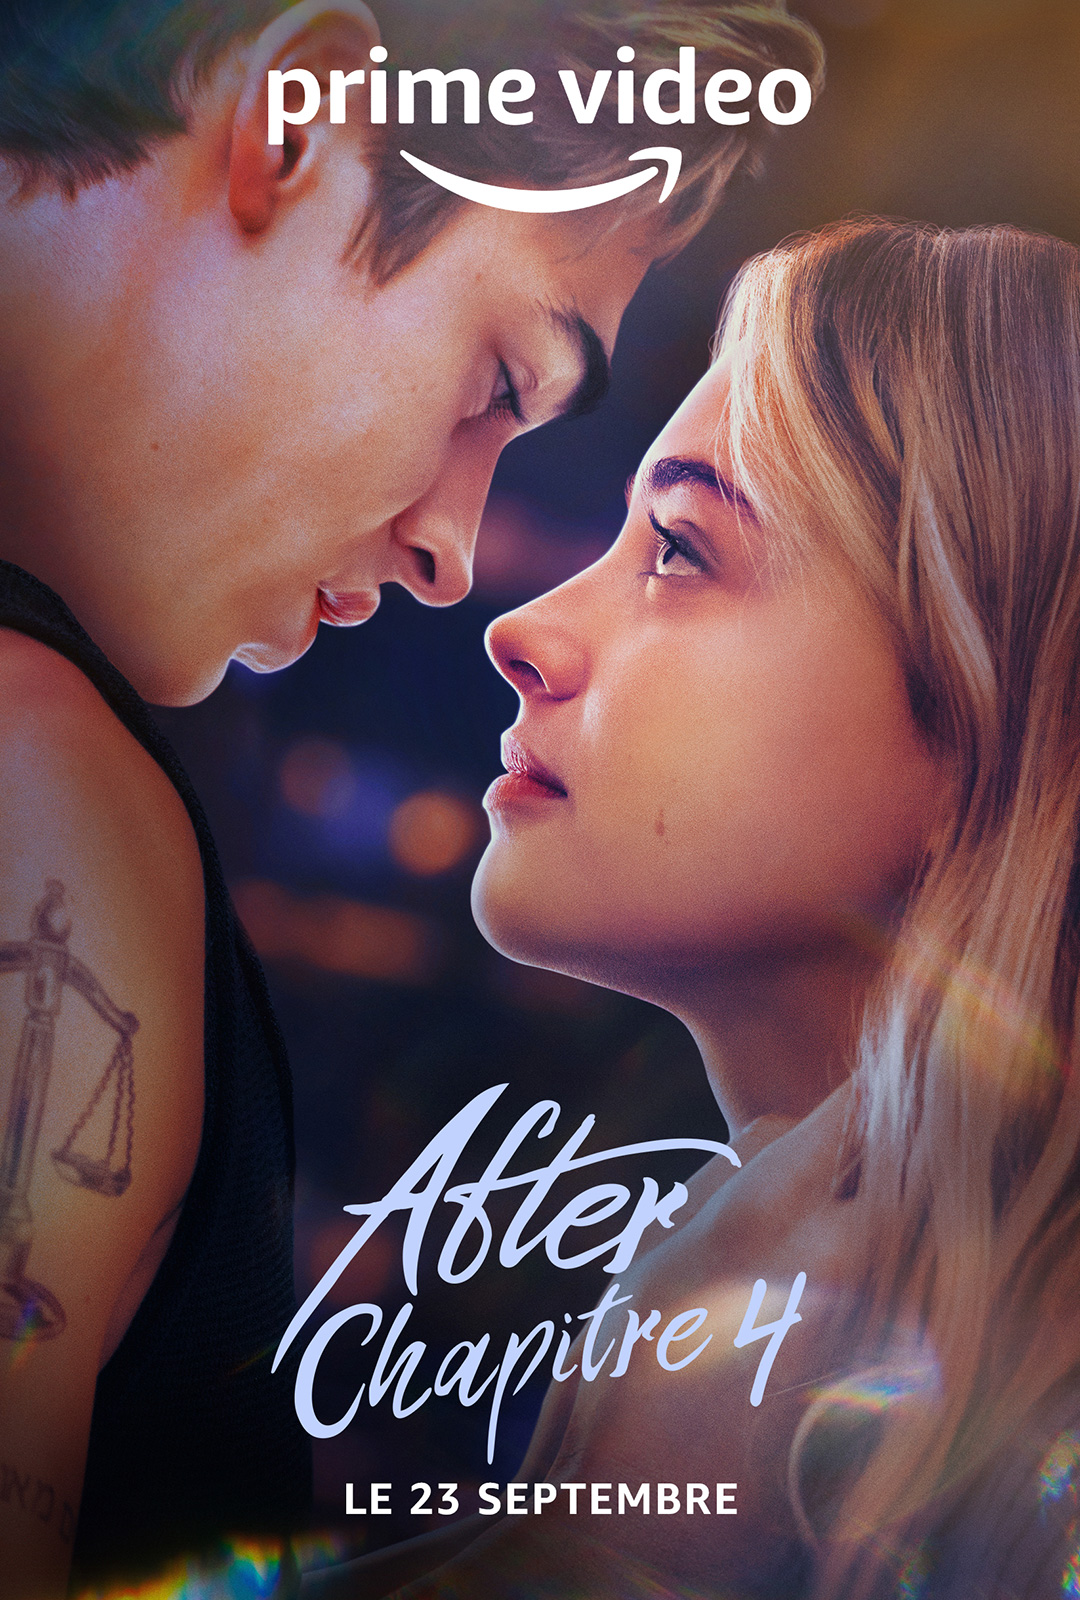 After - Chapitre 4 streaming complet